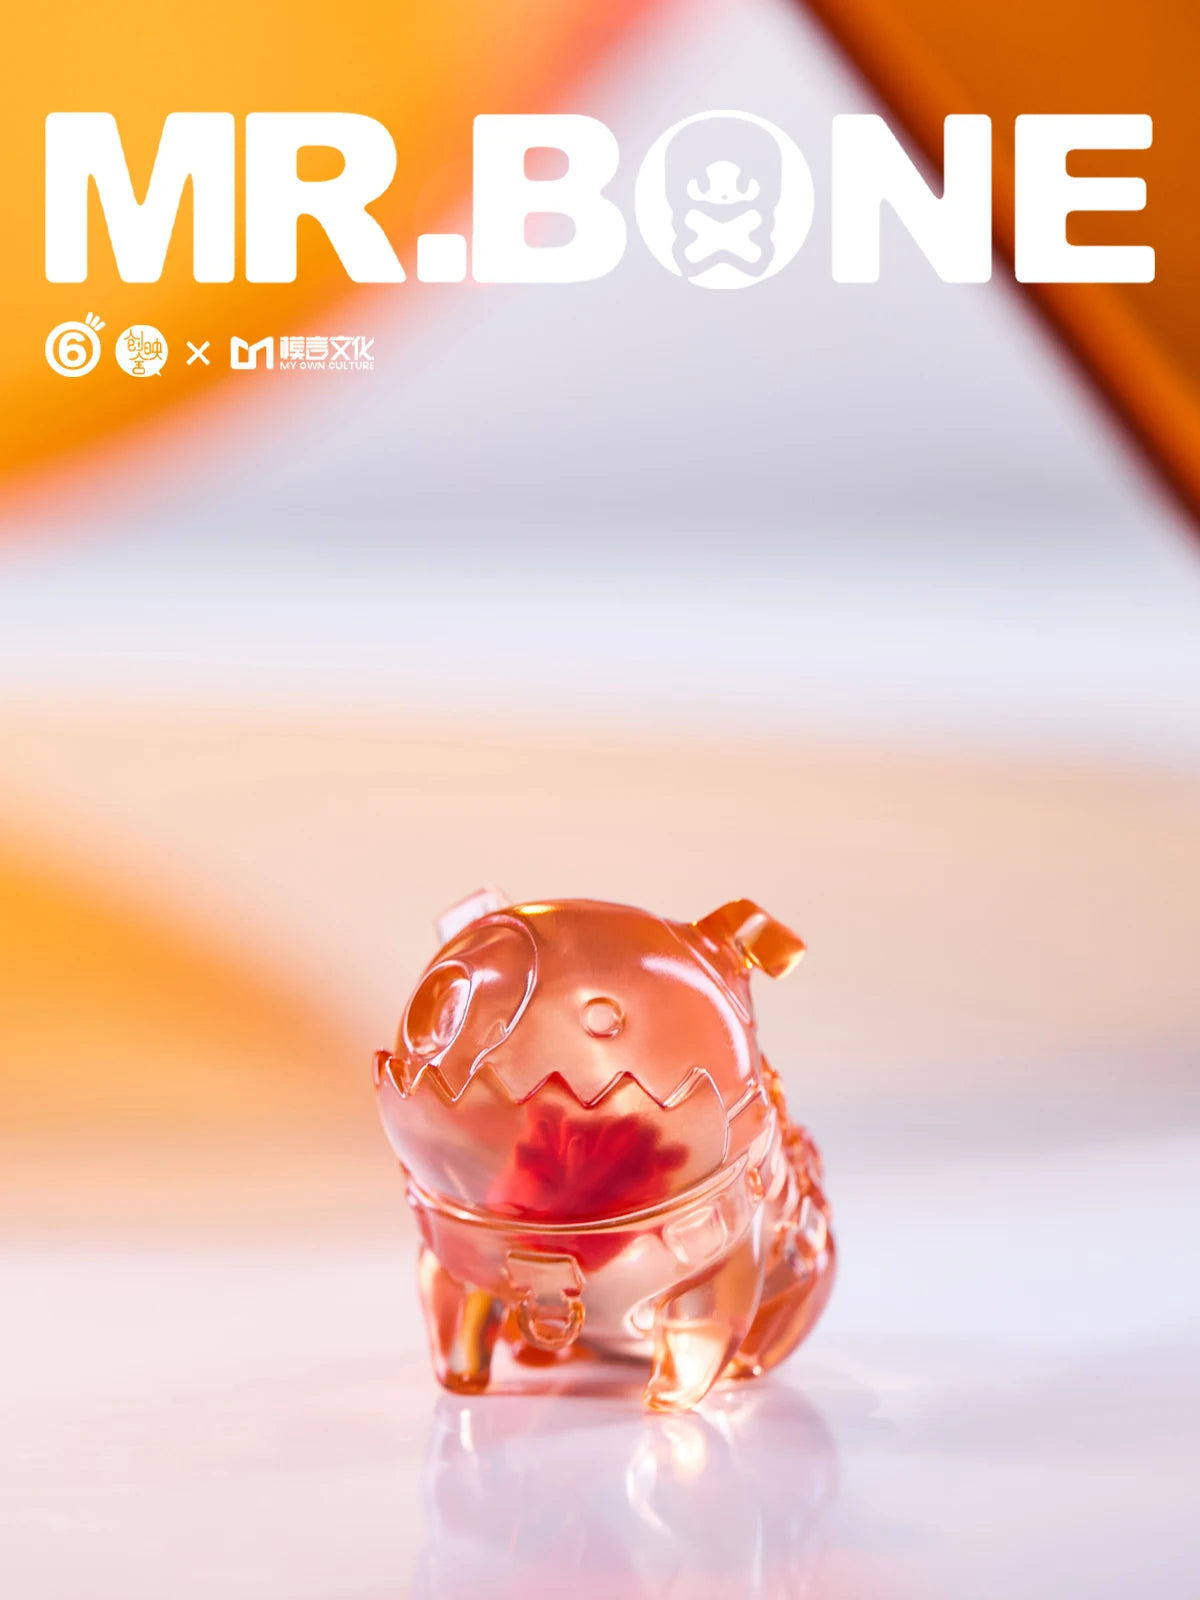 A blind box toy: MR.BONE Grylls - Heart Beat. Resin piggy bank, 12cm limited edition. Plastic toy resembling a pig on a white surface.